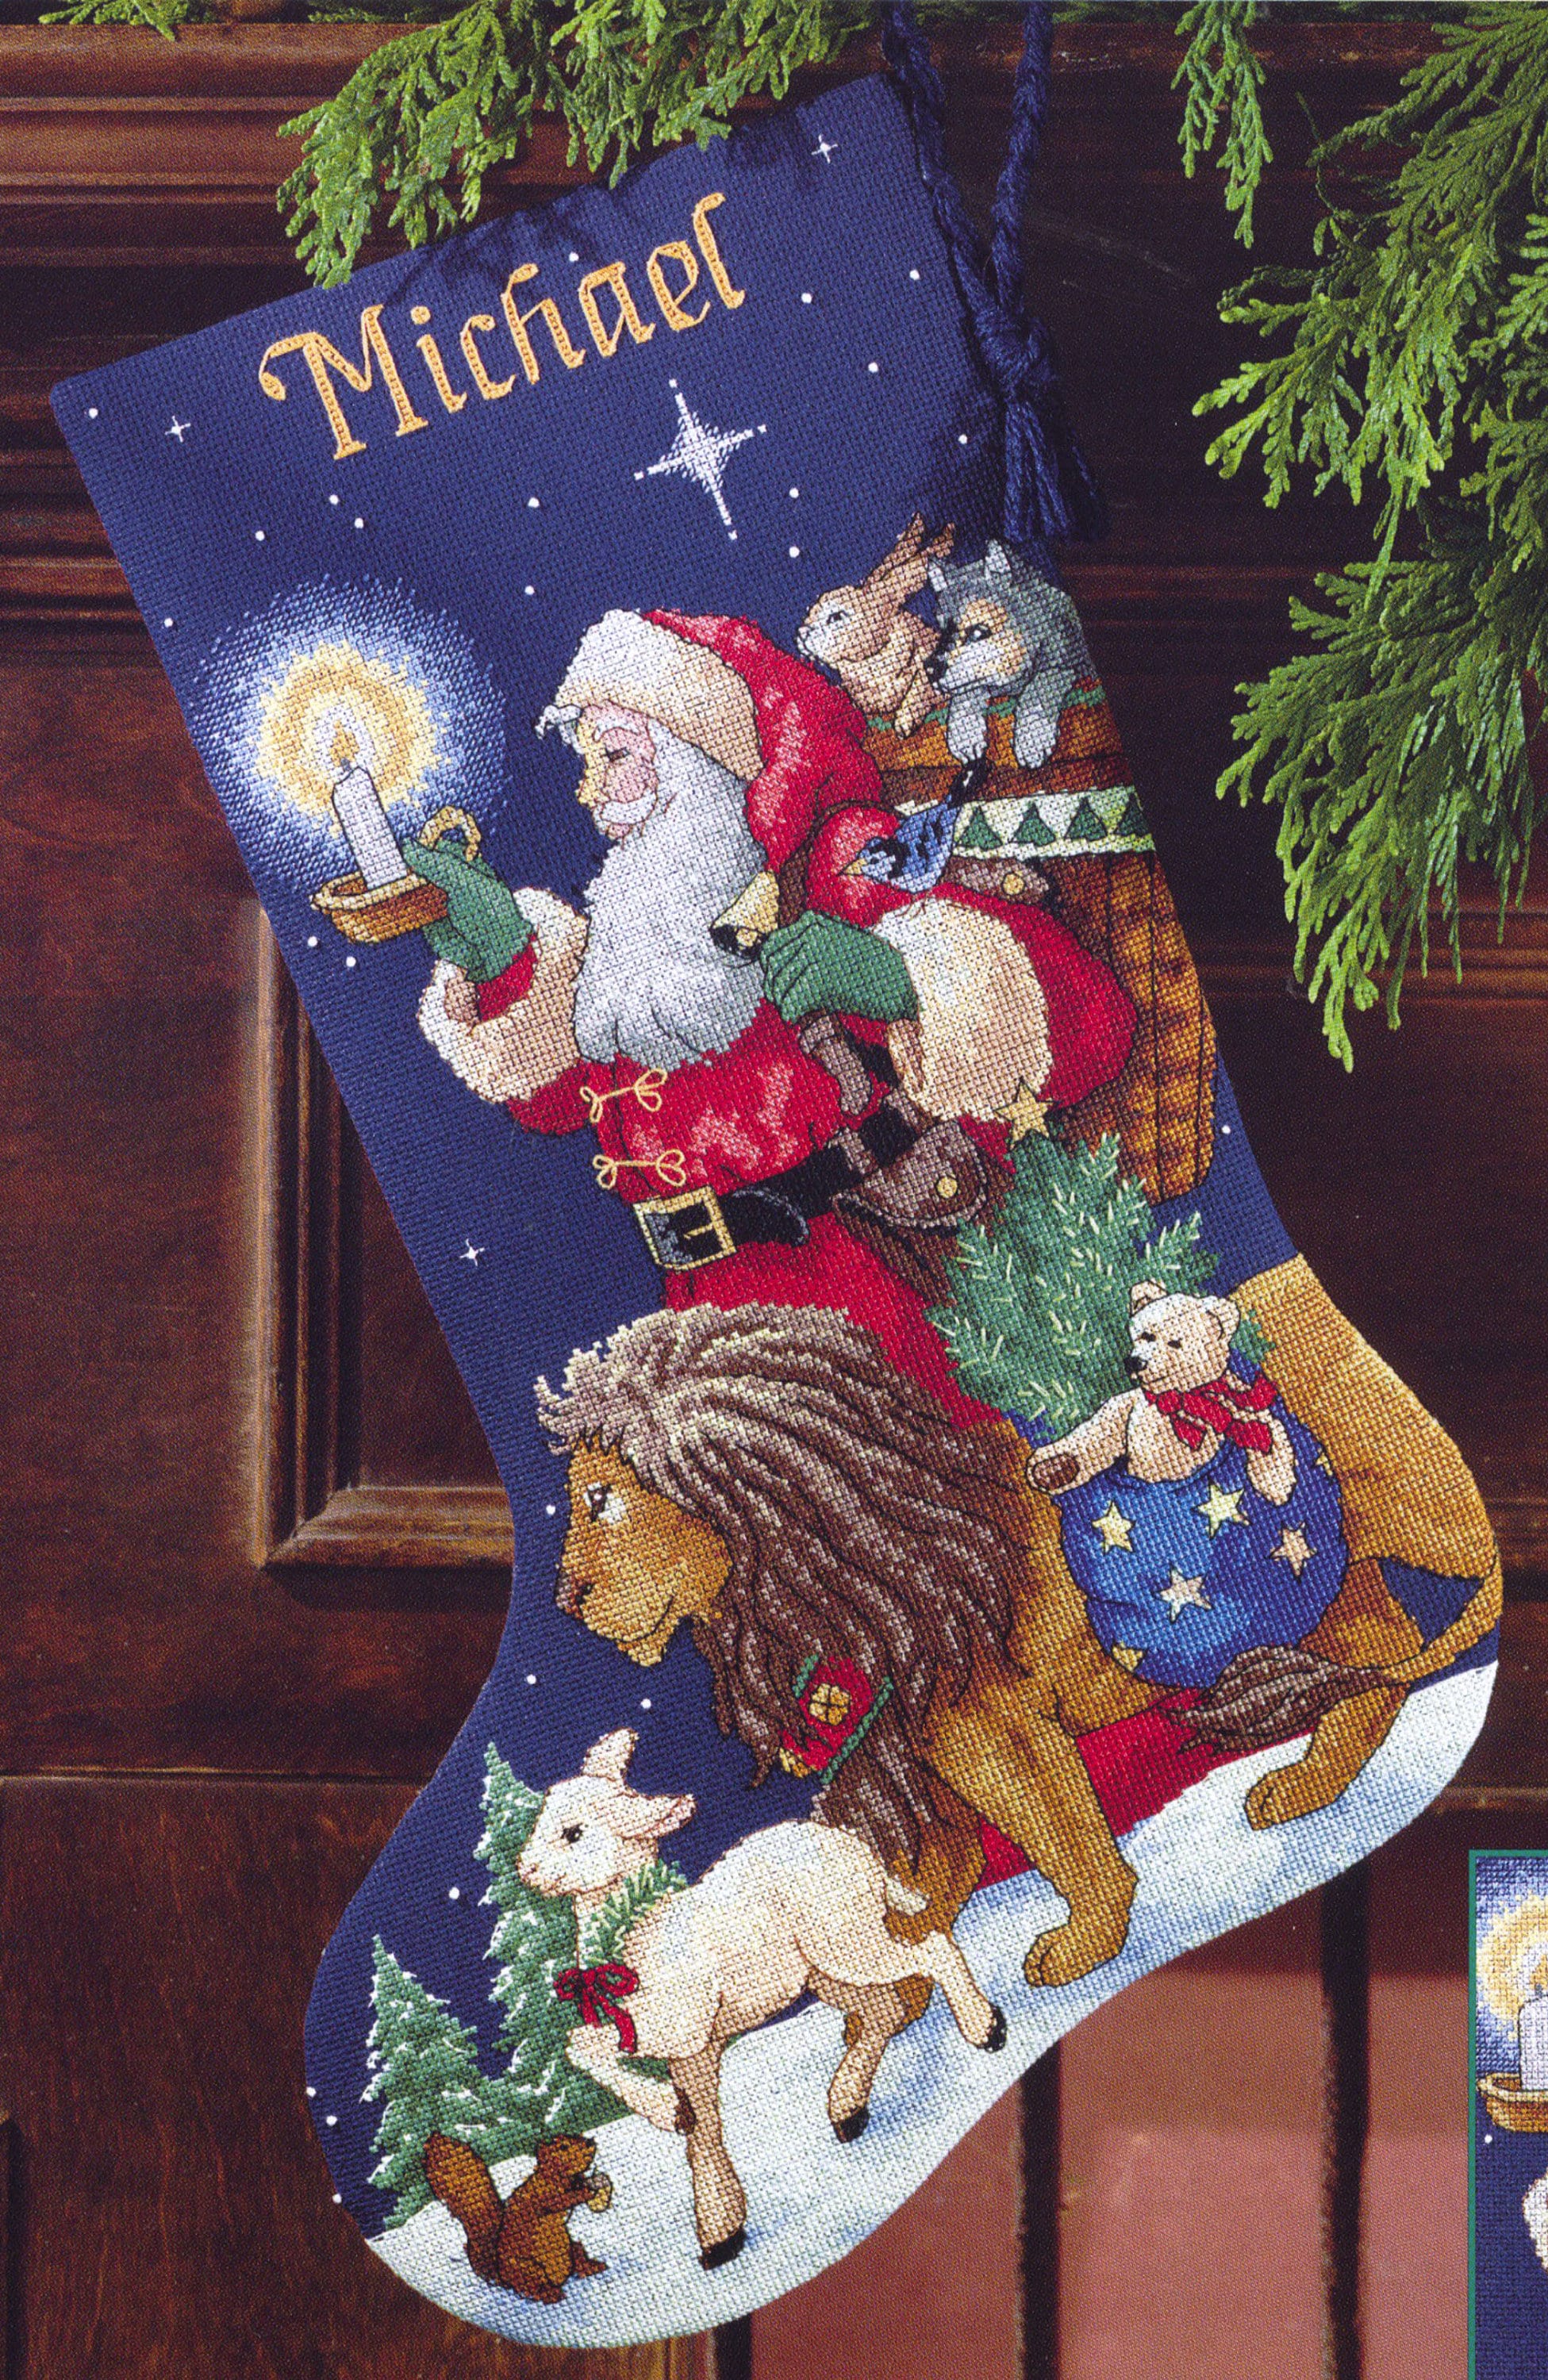 Dimensions Starry Santa Stocking Stamped Cross Stitch Kit 8448 for